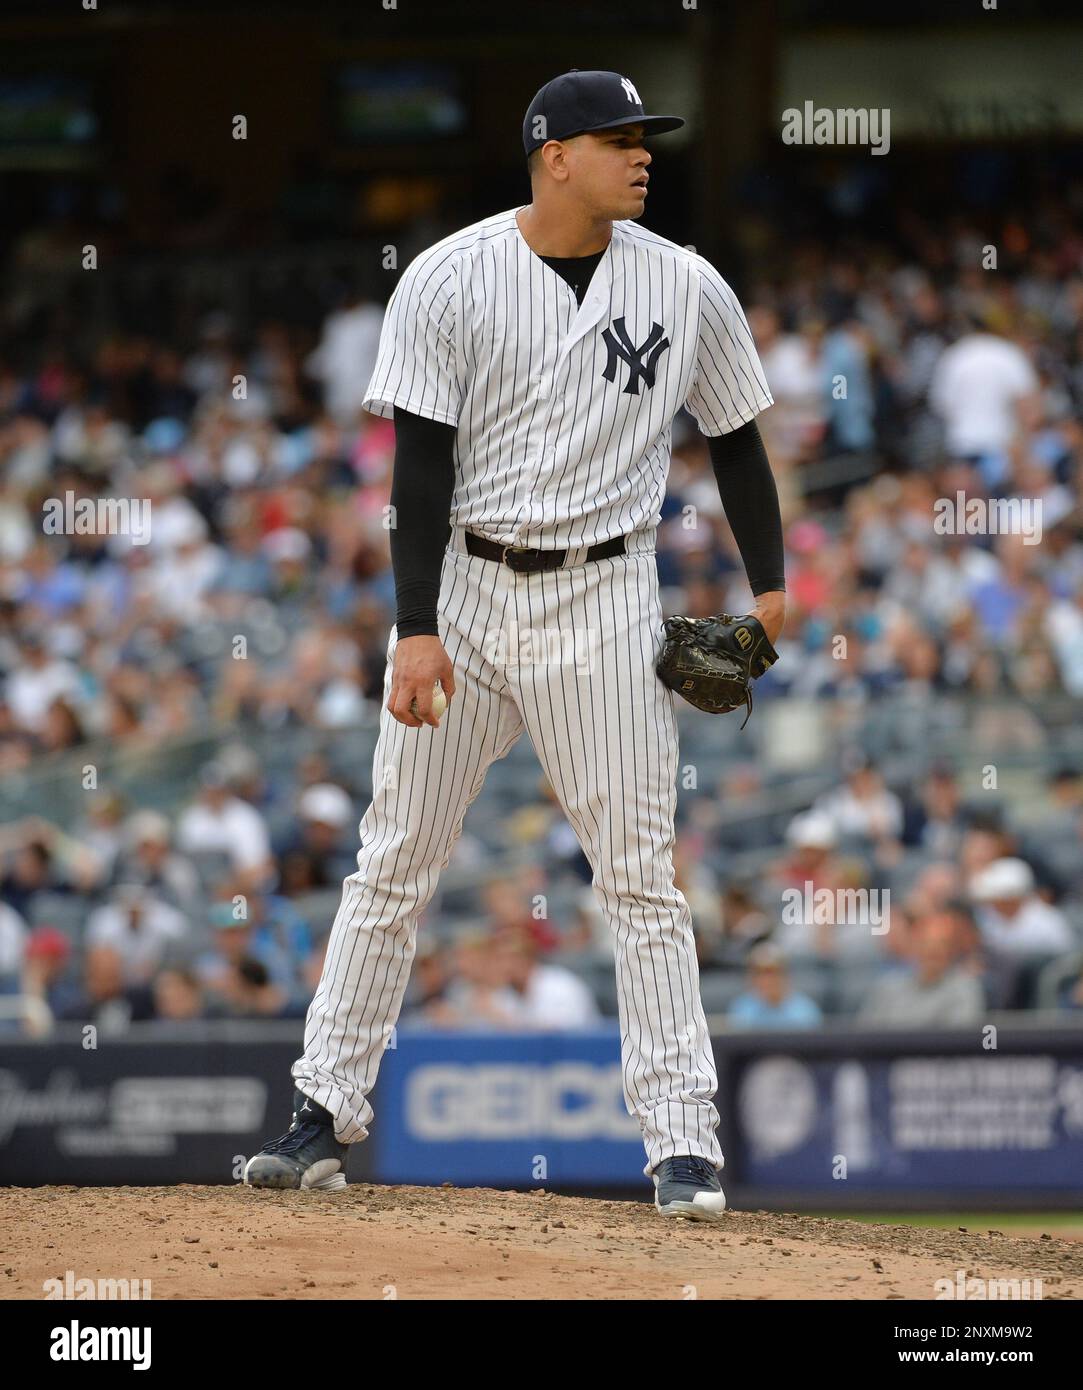 New York Yankees pitcher Dellin Betances (68) during game against the Tampa  Bay Rays at Yankee